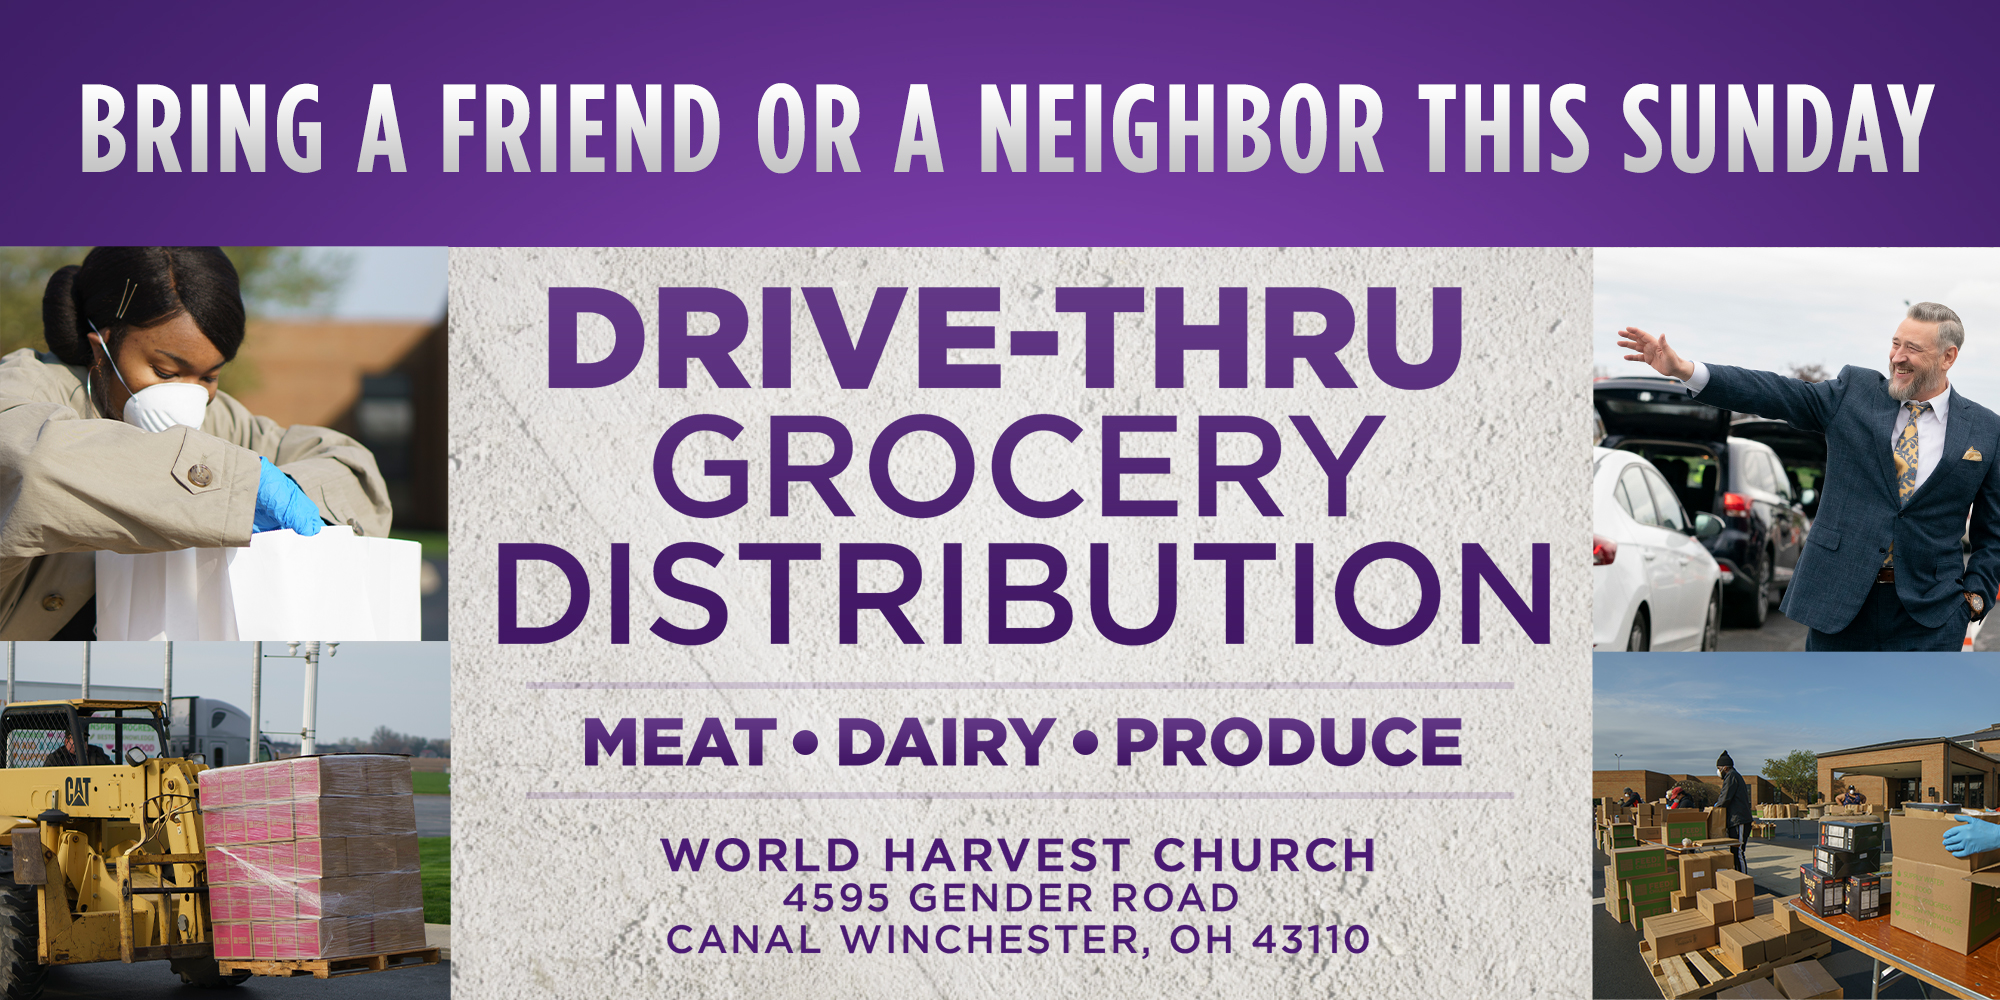 Bring a Friend or a Neighbor This Sunday Drive-thru Grocery Distribution Meat Dairy Produce World Harvest Church 4595 Gender Road Canal Winchester, Oh 43110